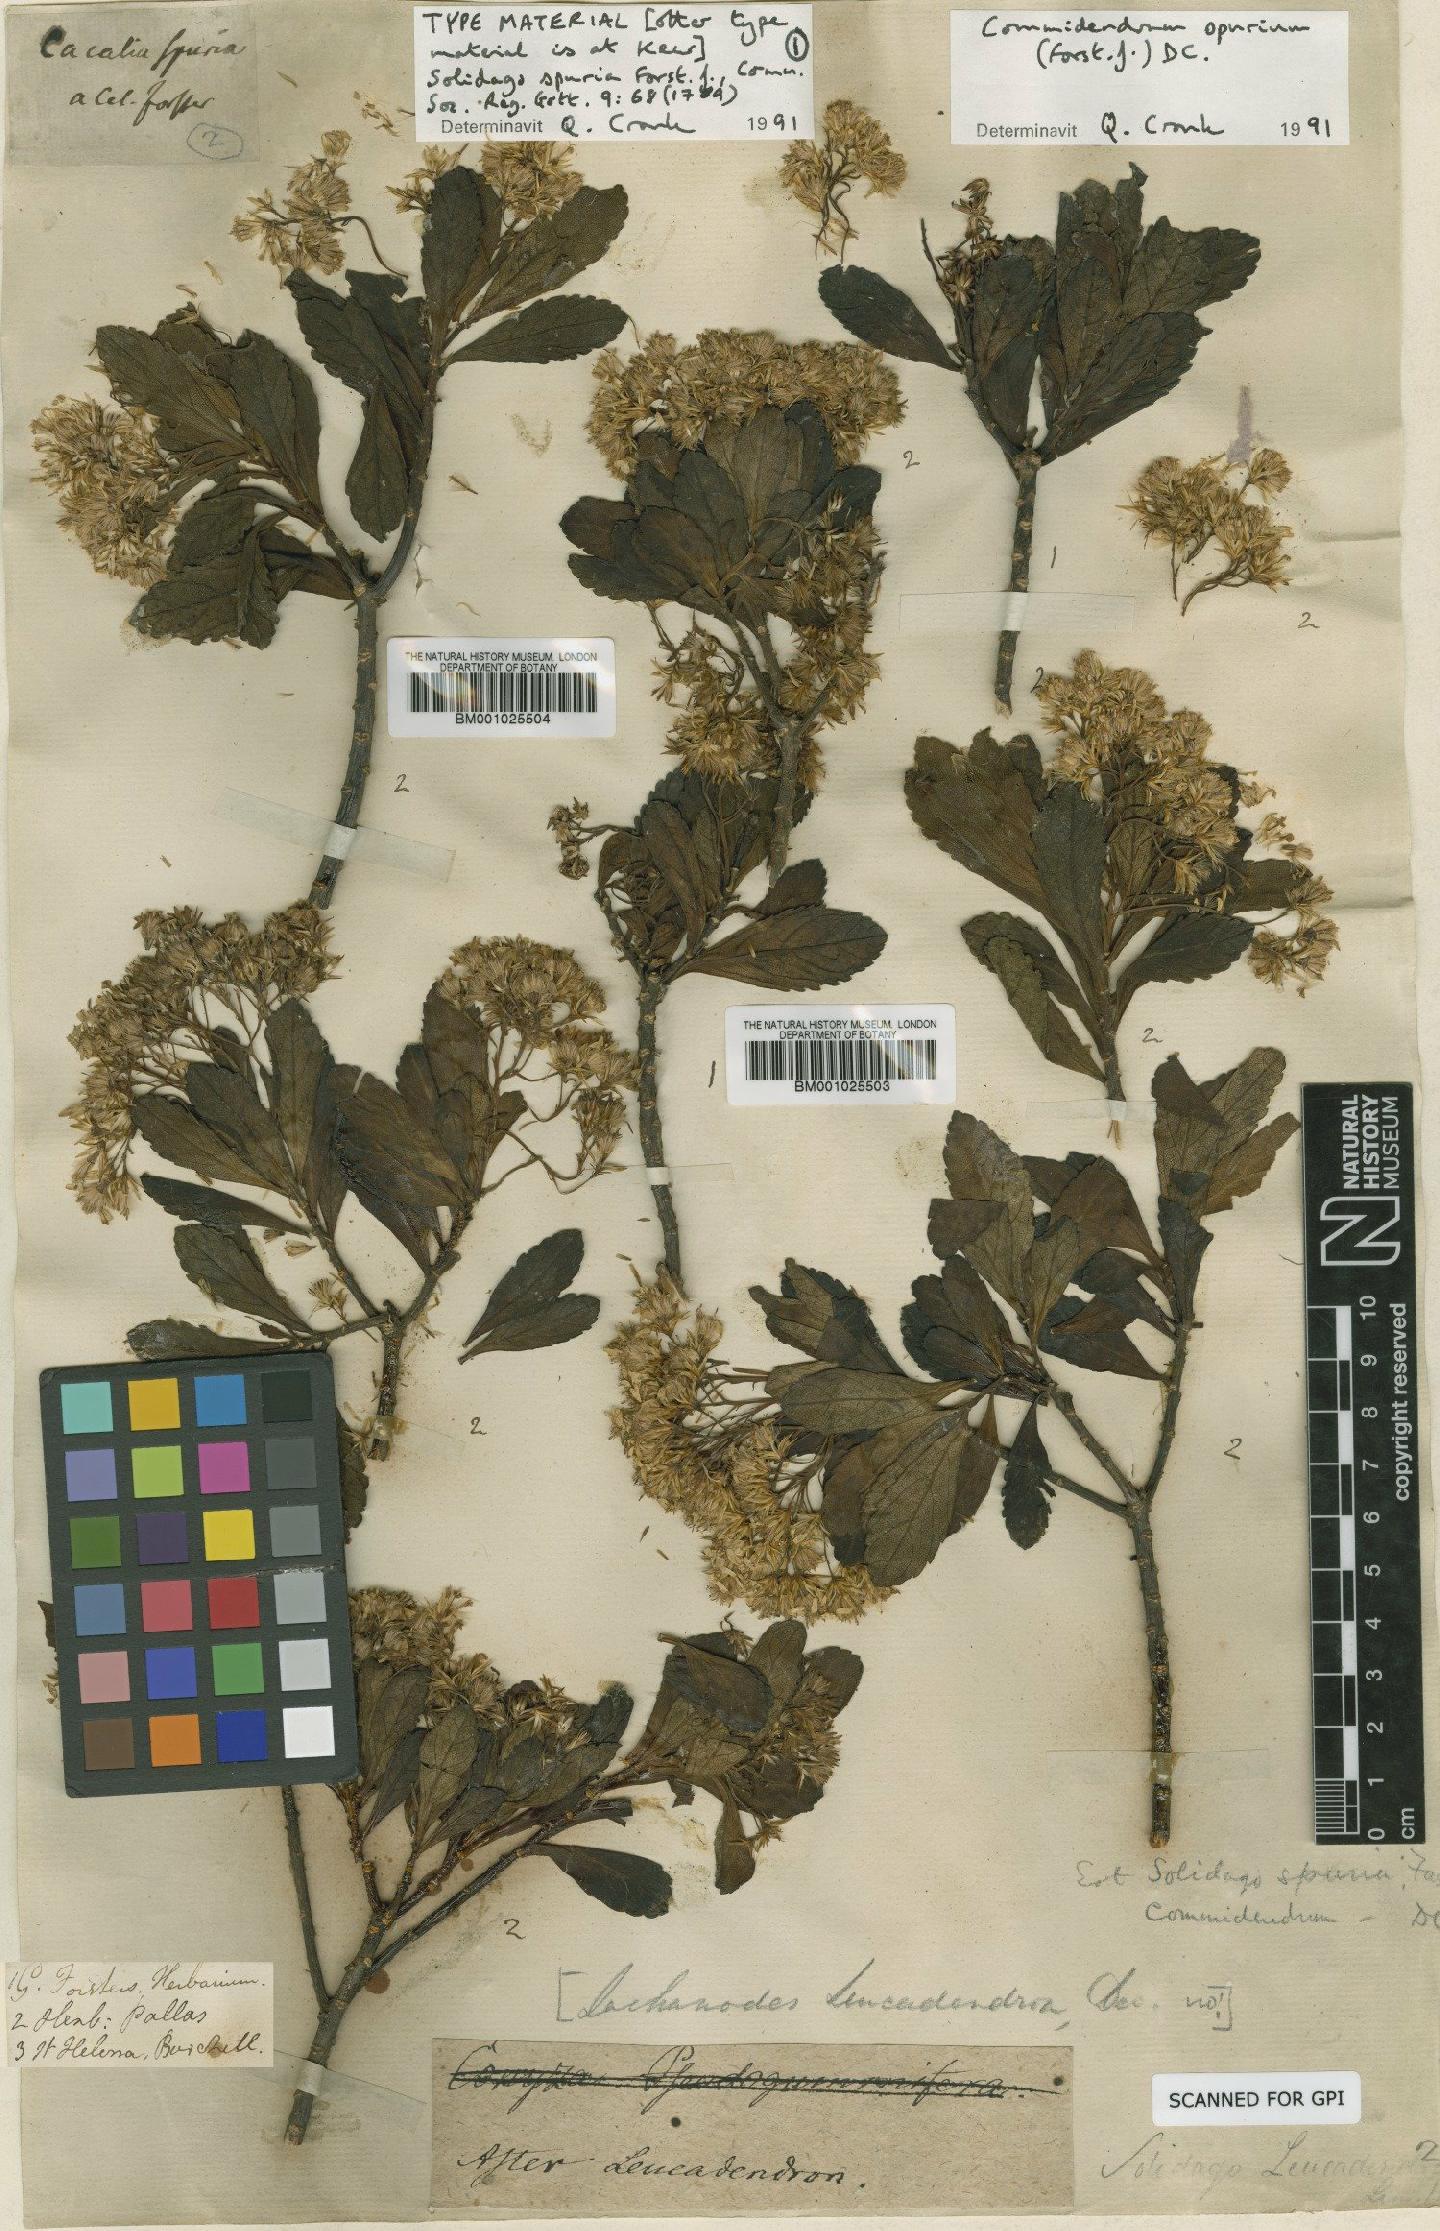 To NHMUK collection (Commidendrum spurium (T.F.Forst.) DC.; Type; NHMUK:ecatalogue:1125057)